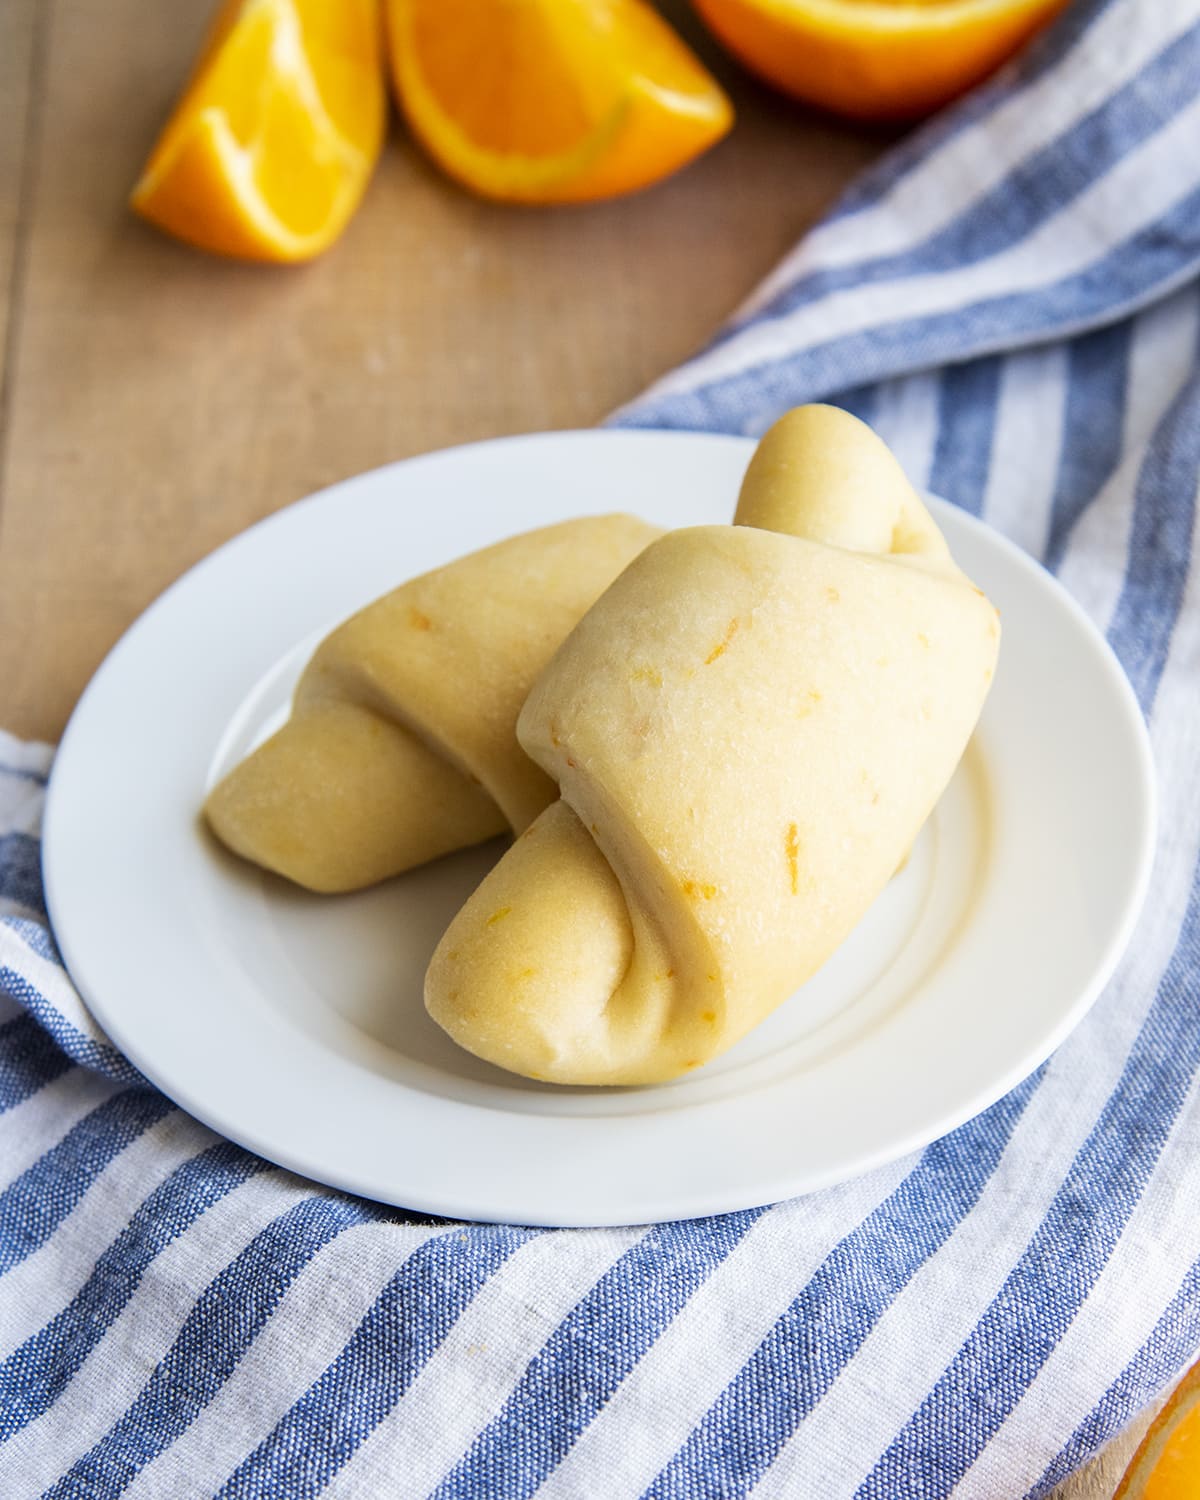 Two orange crescent rolls on a small plate.